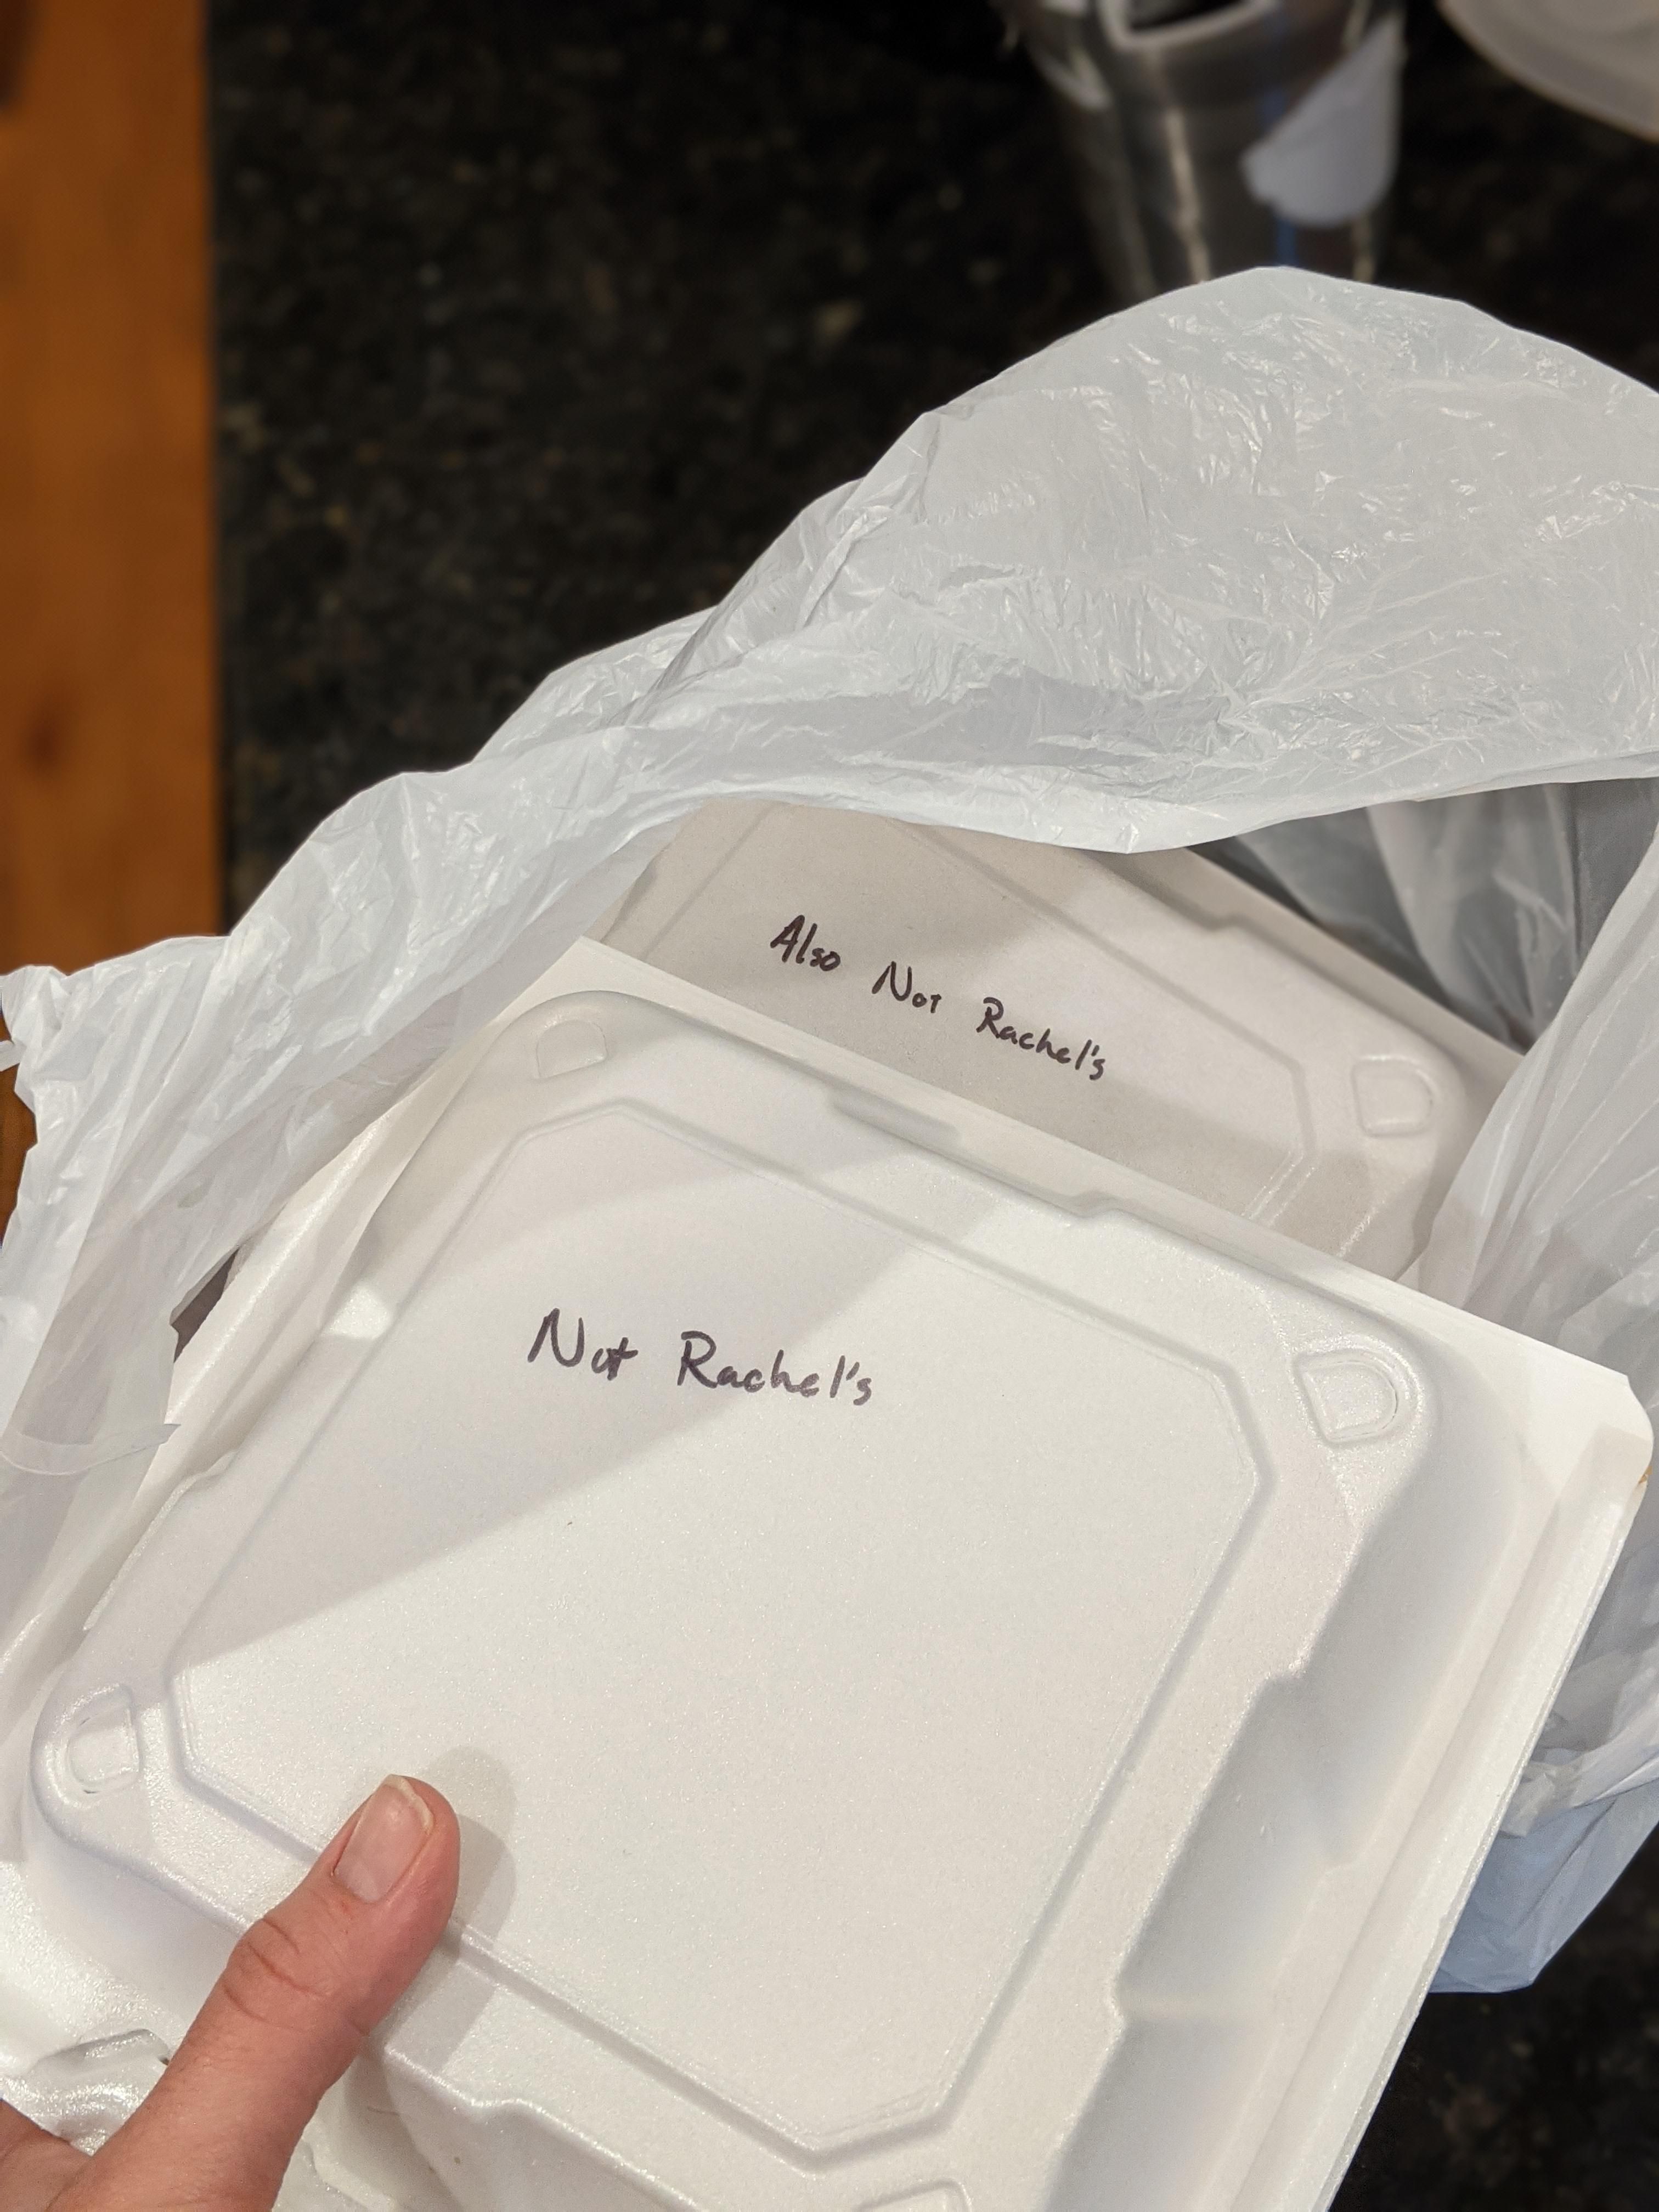 Asked my husband to label our leftovers, "sure babe" he tells me